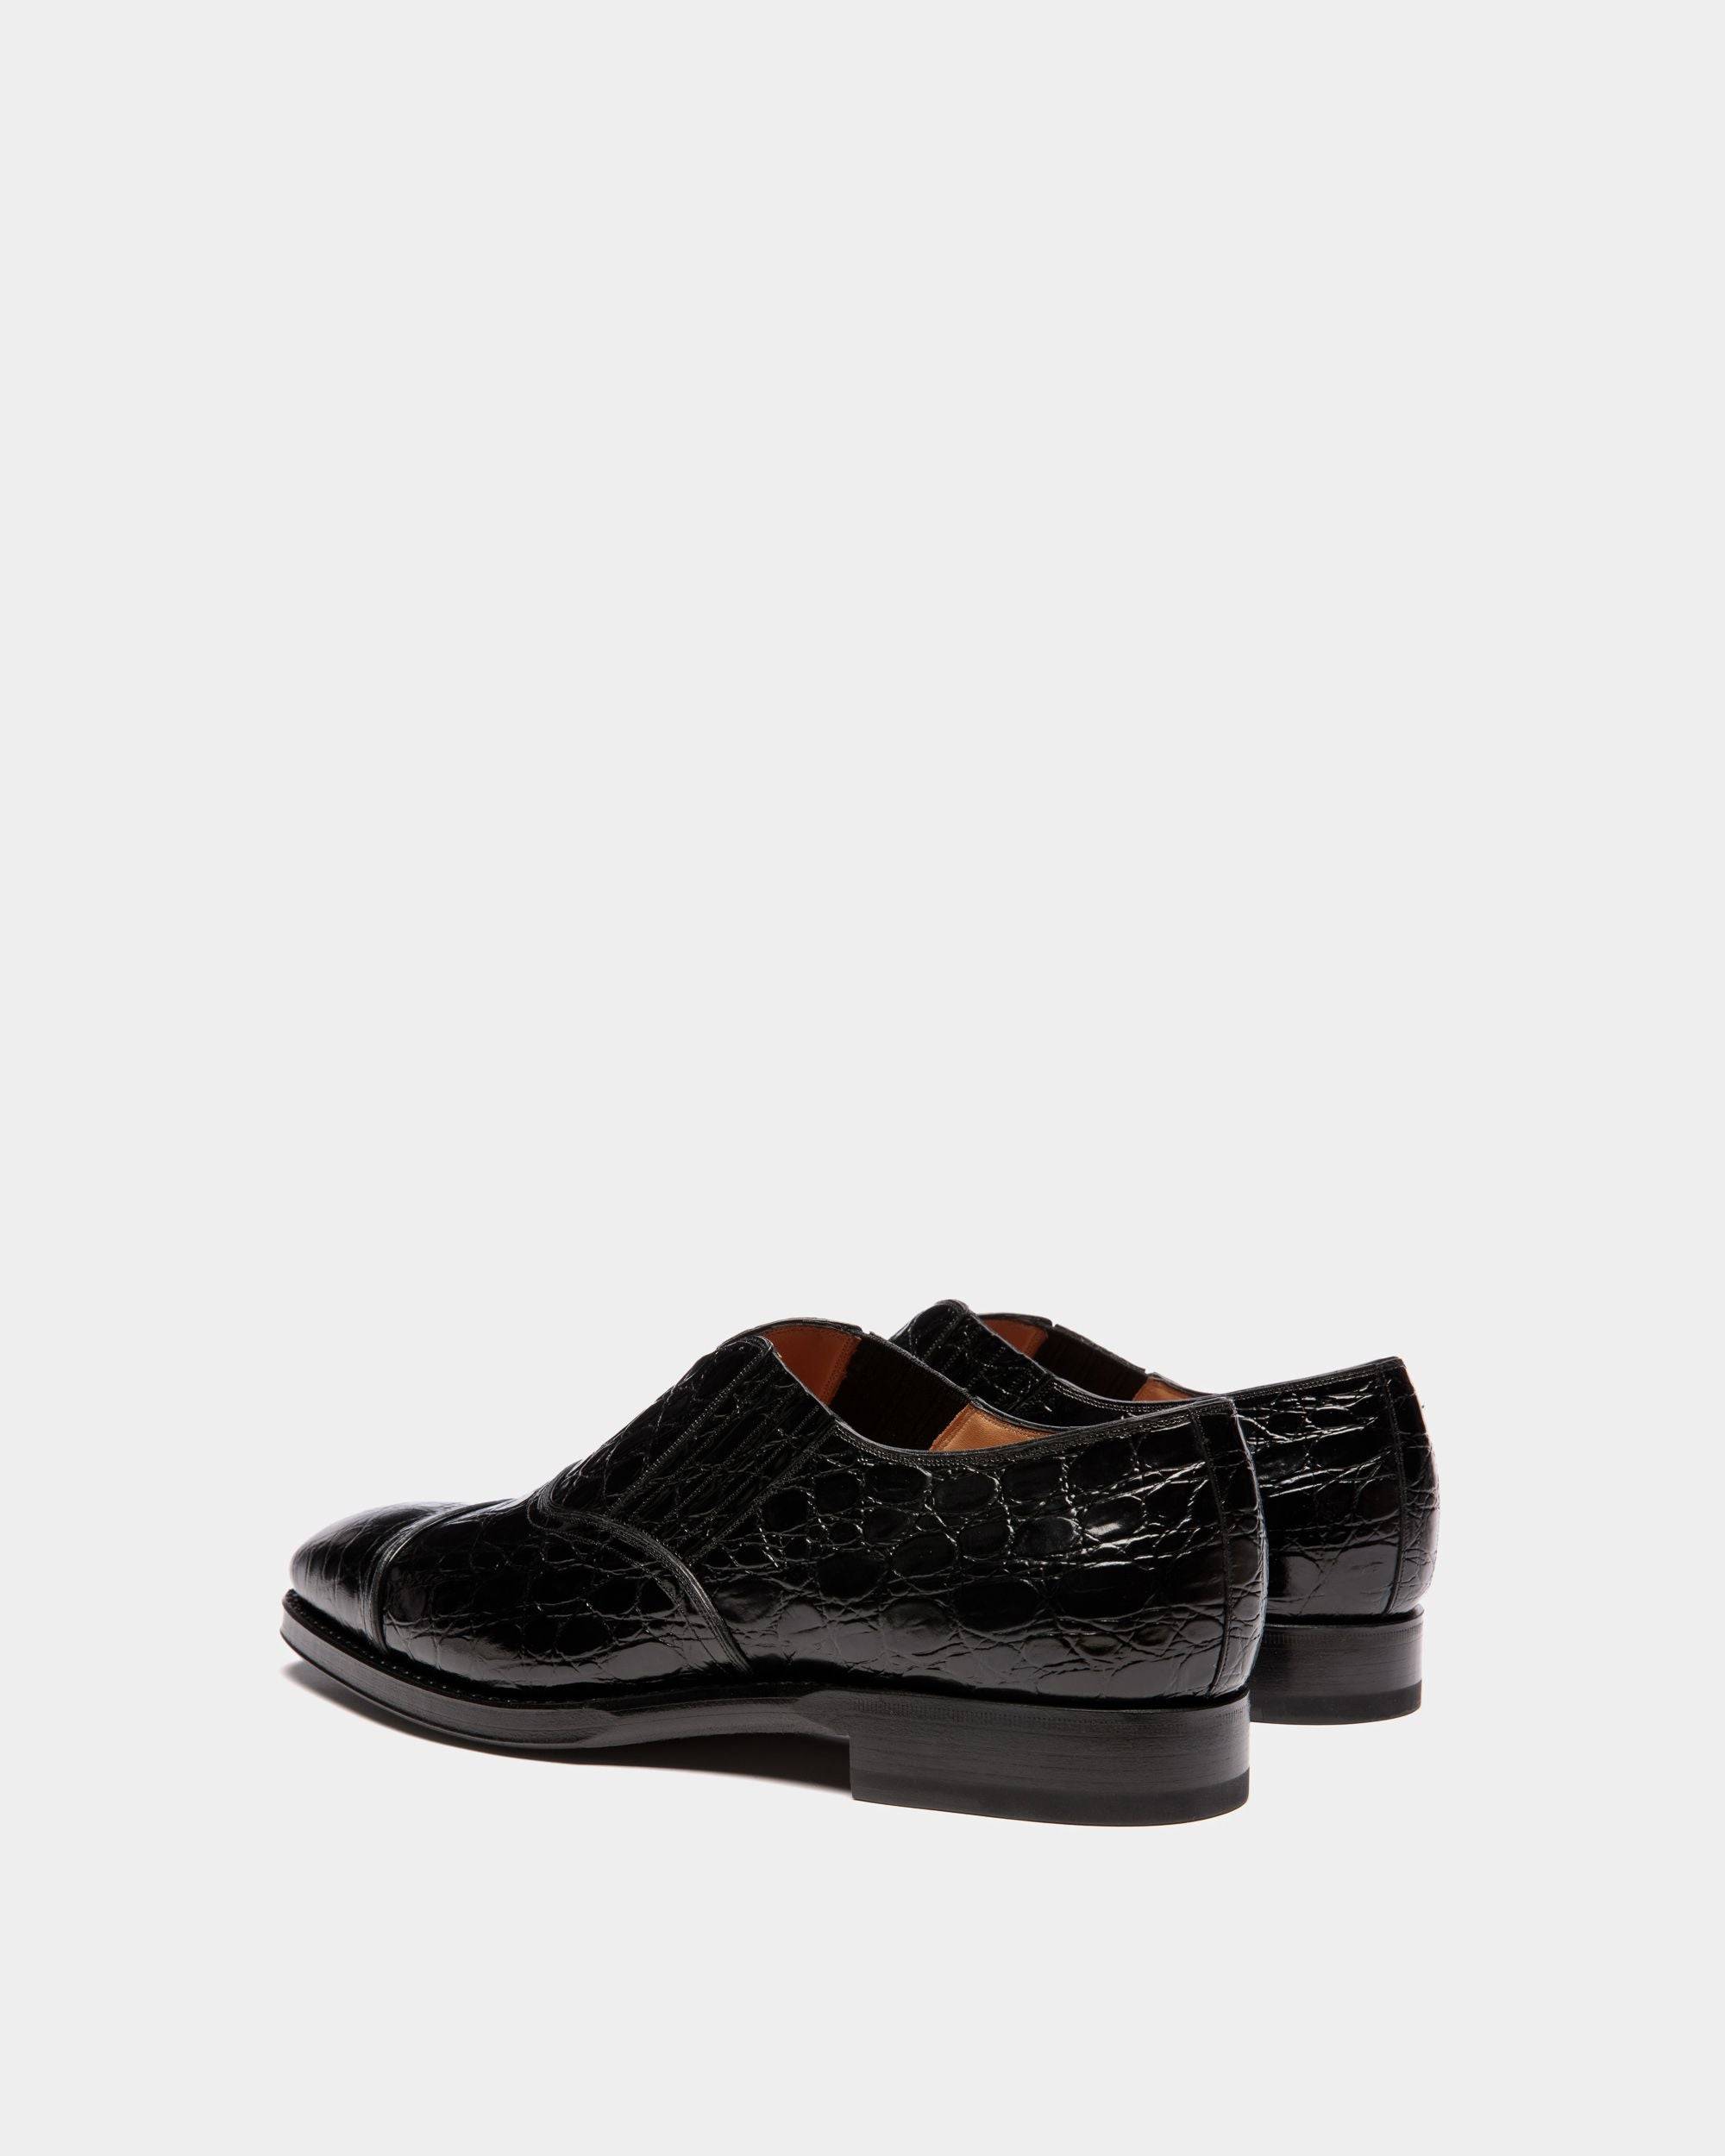 Scribe | Men's Loafer in Black Printed Leather | Bally | Still Life 3/4 Back